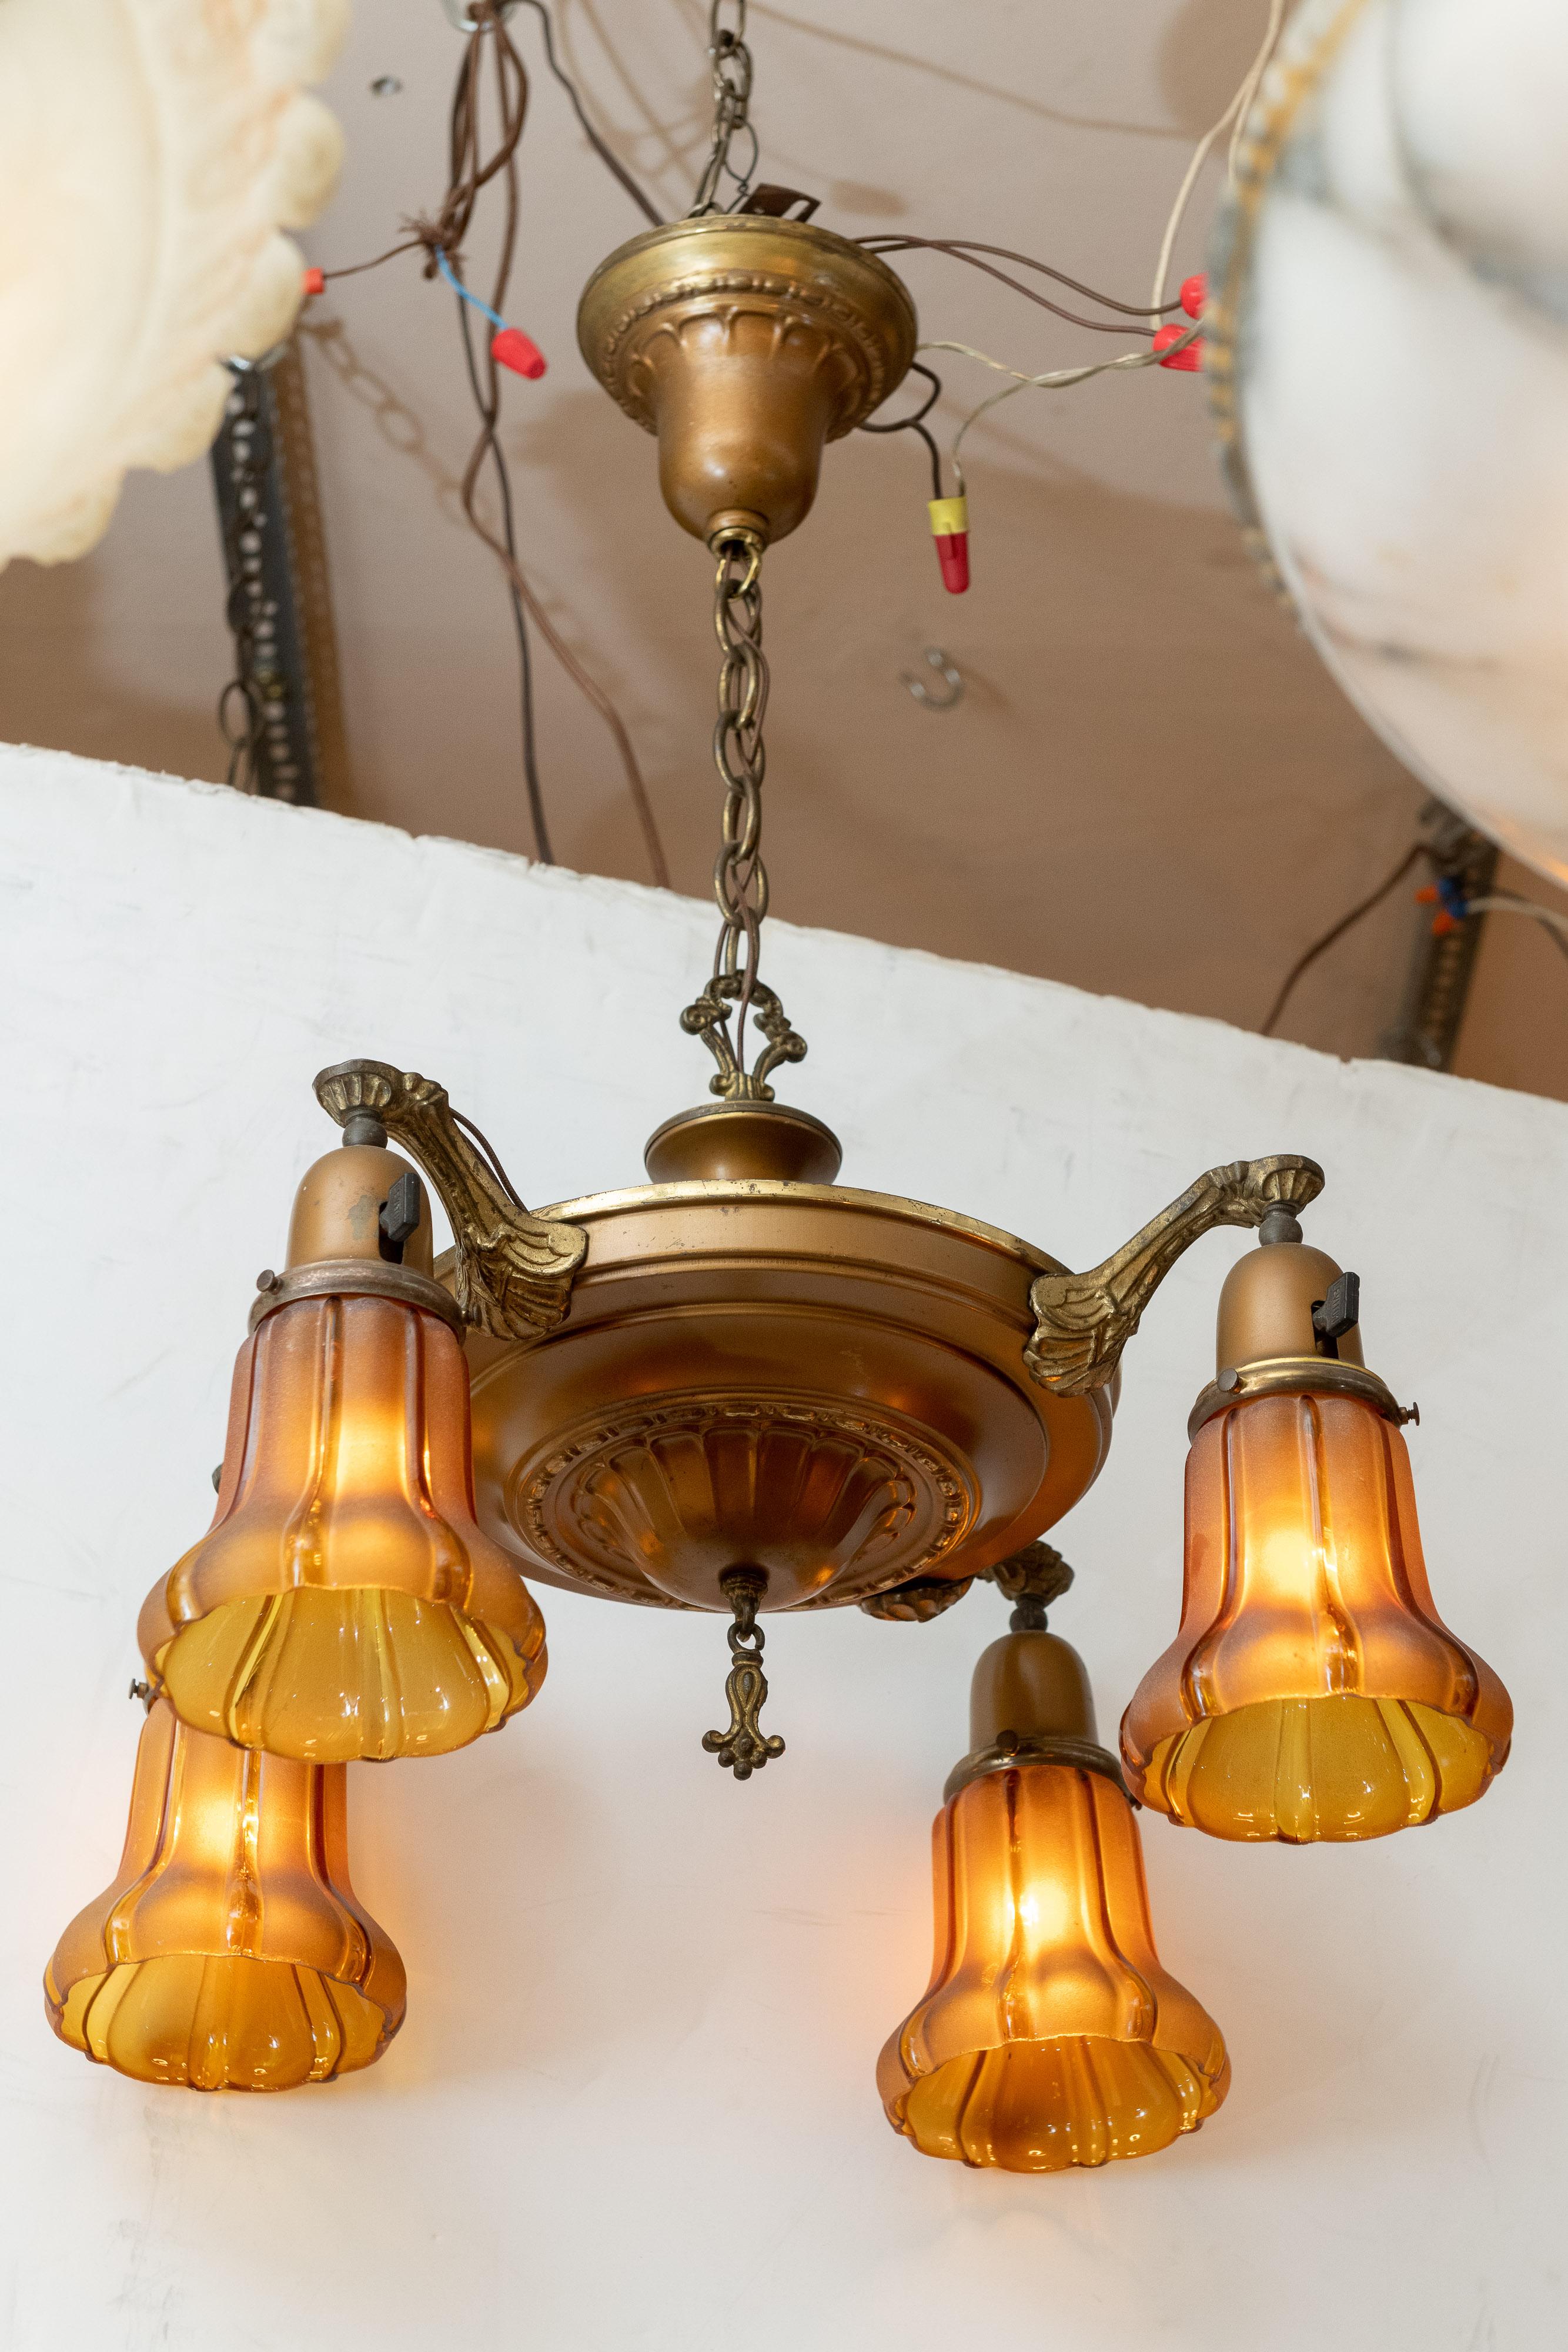 These chandeliers are usually referred to as 